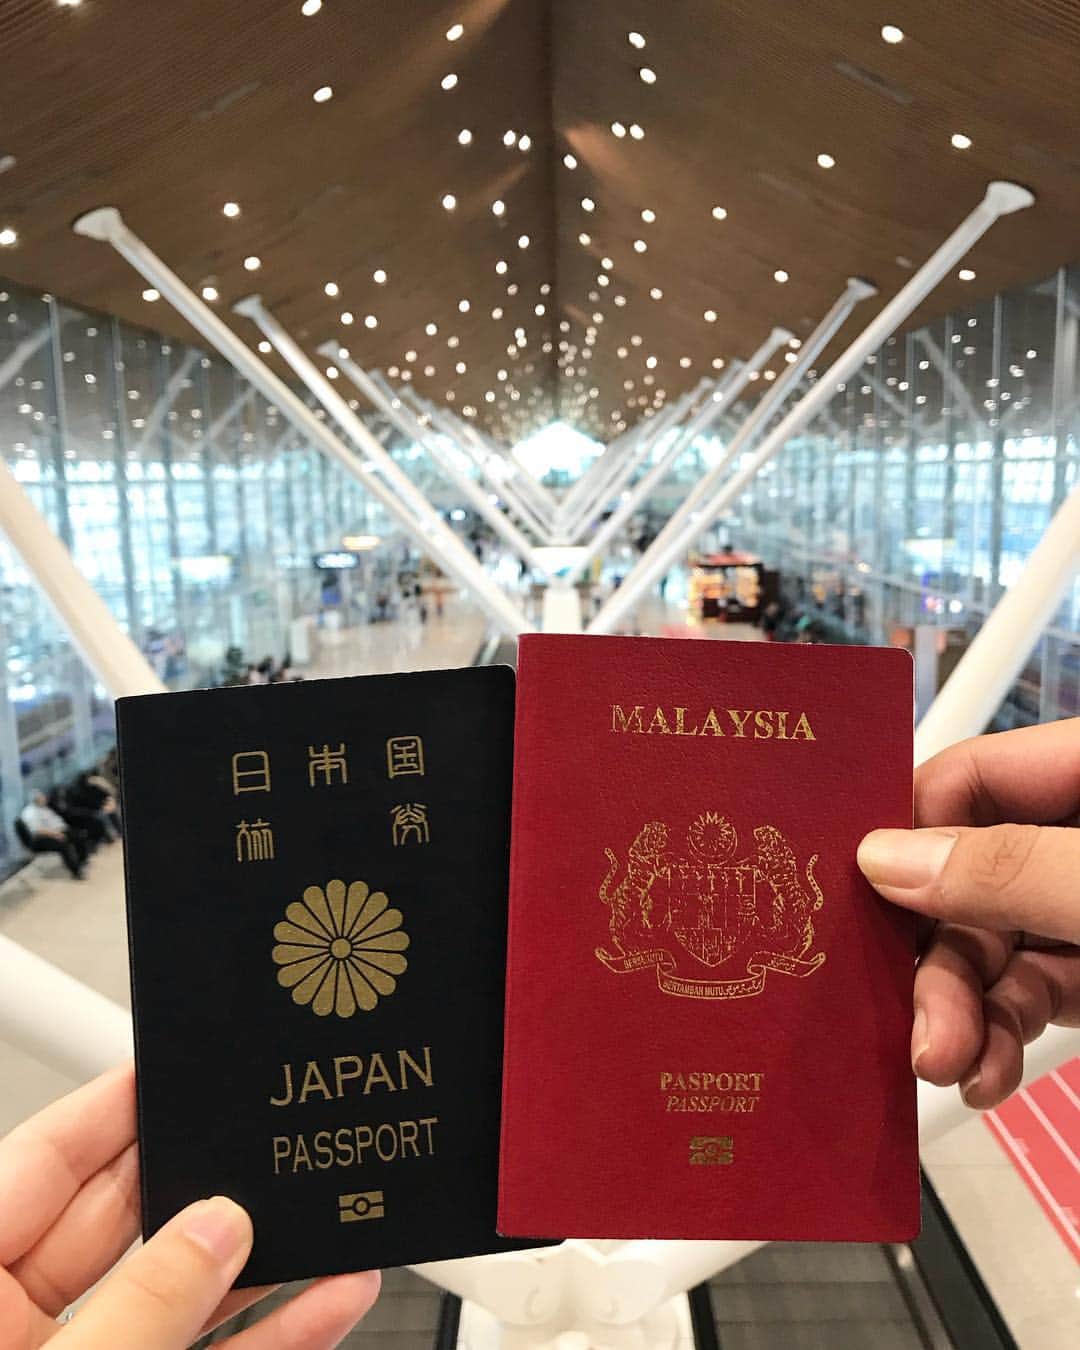 Risa Mizunoのインスタグラム：「Never expected the life will be in Malaysia and Japan. Every time we fly, we get a reminder of the importance to take care of our family in the two countries. This is truly our motivation to work hard for our family well-being. Alhamdulillah ☺️ Today we are off to Tokyo✈️ See you again Malaysia in the holy moth of Ramadan Inshallah ✨  #japanesemuslim #japanesemuslimah #muslim #muslimah #japanese #japan #tokyo #malaysia #muslimahtokyo #travel #travelblogger #travelgram #travellover #travellife #hijab #tudung #日本人ムスリム #日本 #東京 #マレーシア #国際結婚 #🇲🇾 #❤️ #🇯🇵 #ANA旅 #flyana」